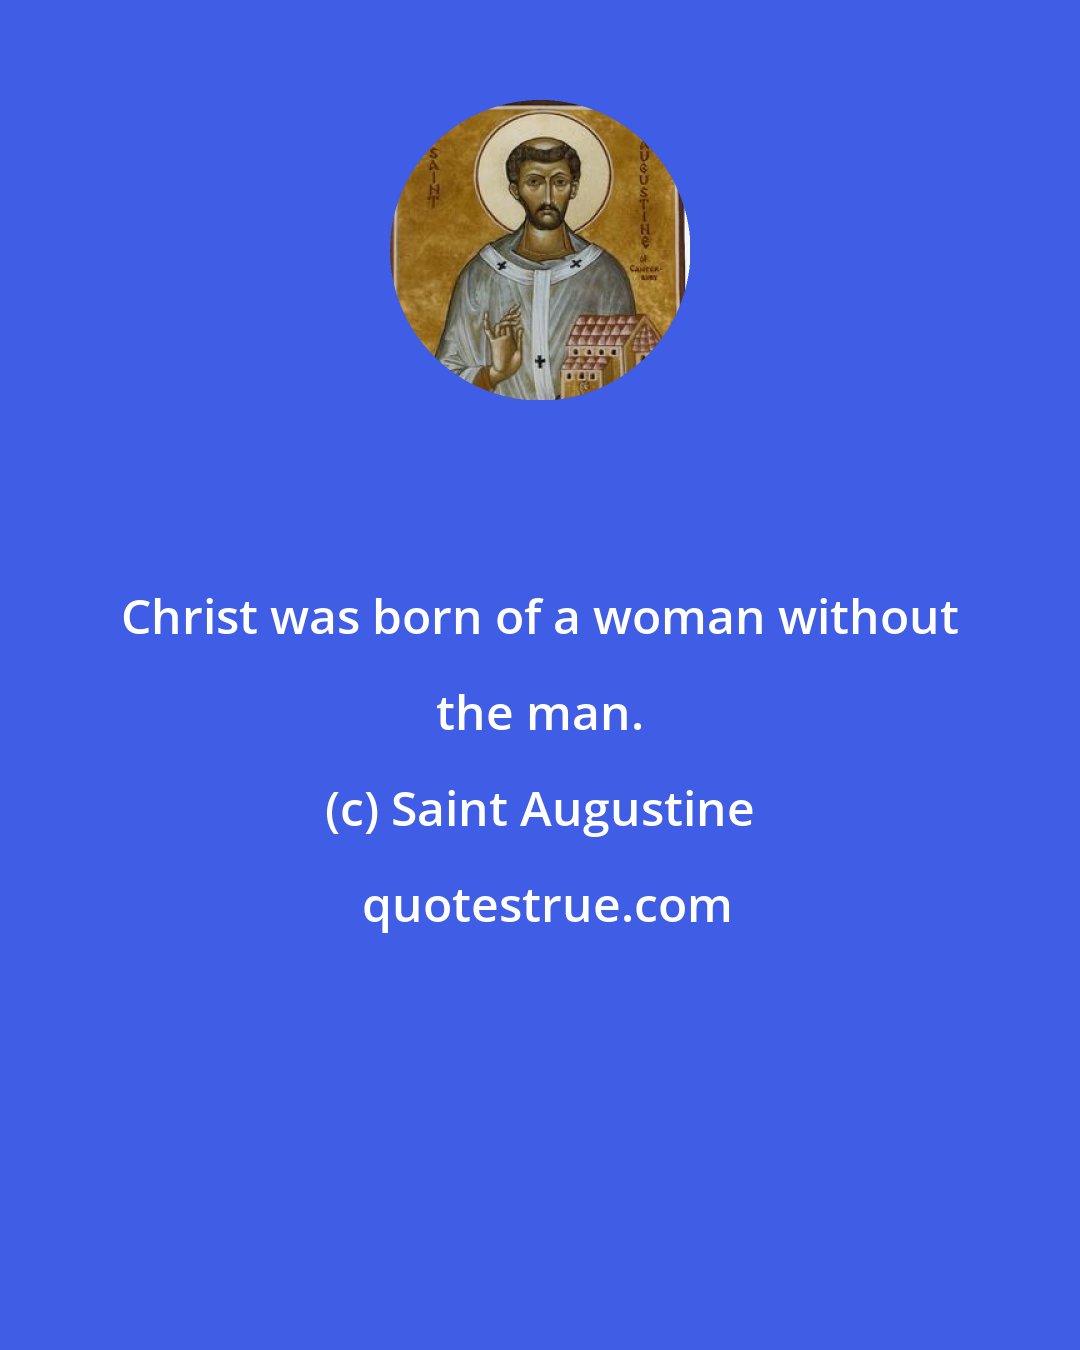 Saint Augustine: Christ was born of a woman without the man.